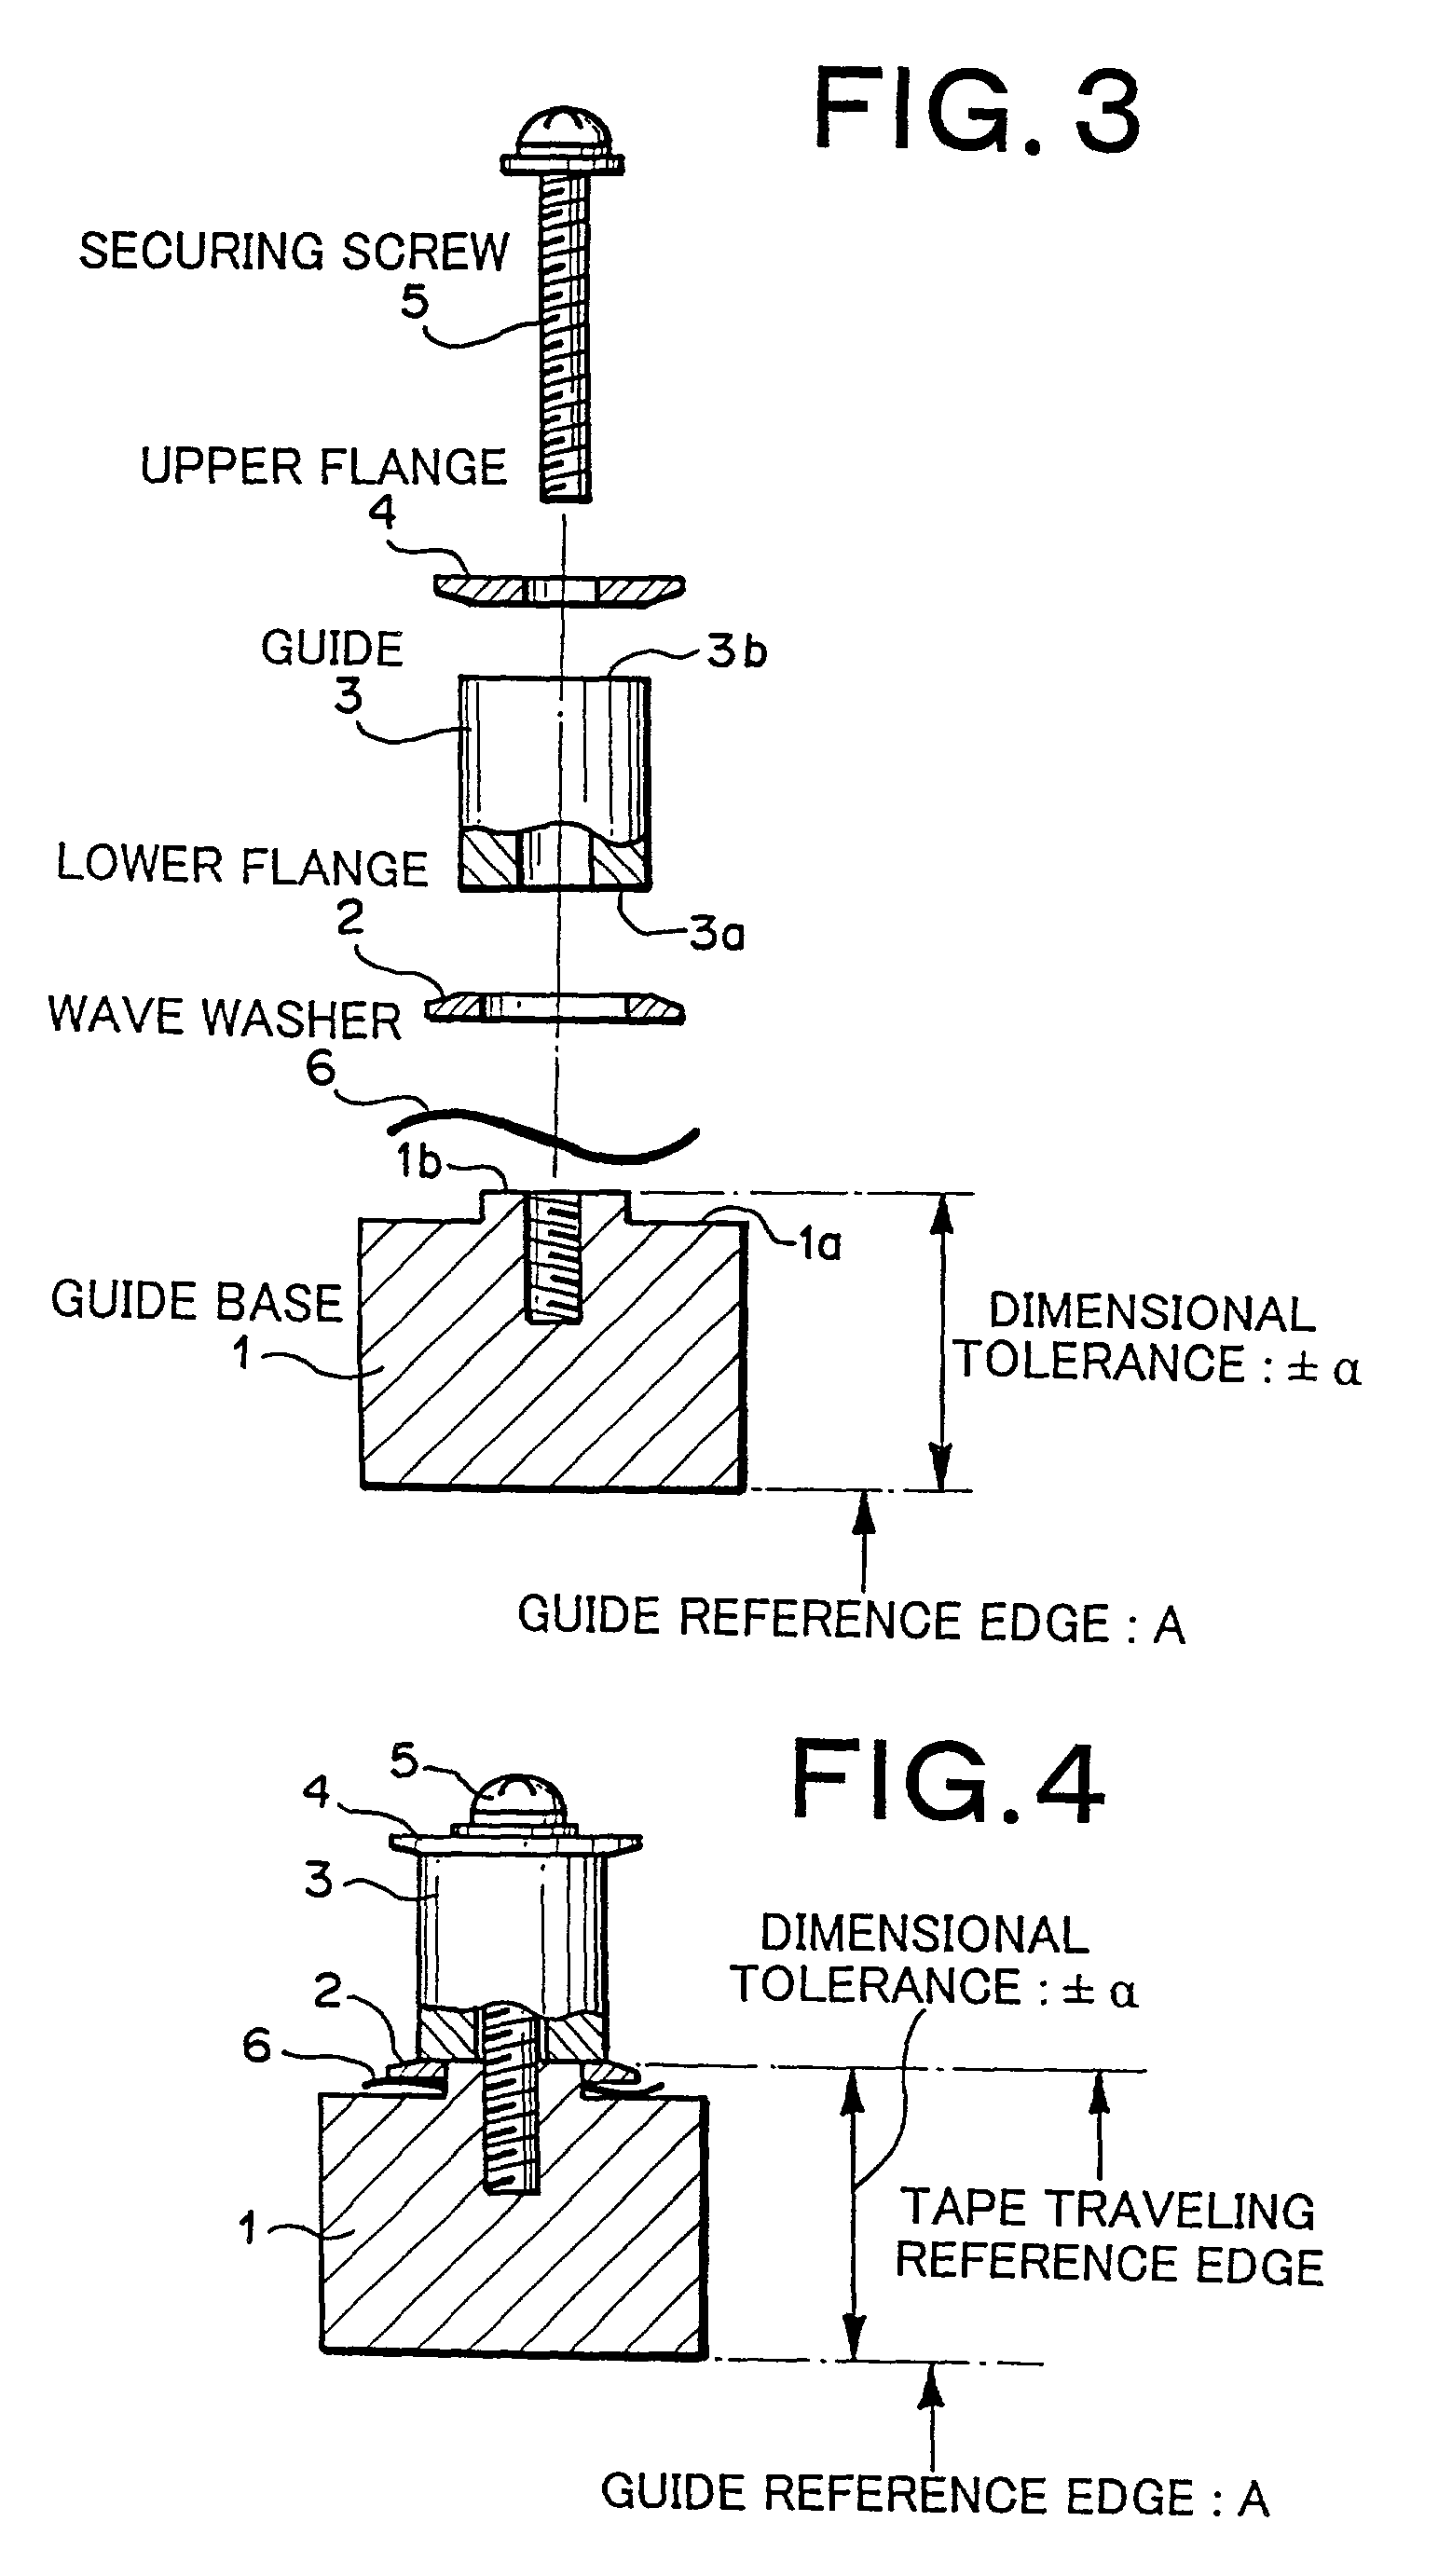 Mechanism for restricting lateral position of tape traveling in longitudinal direction